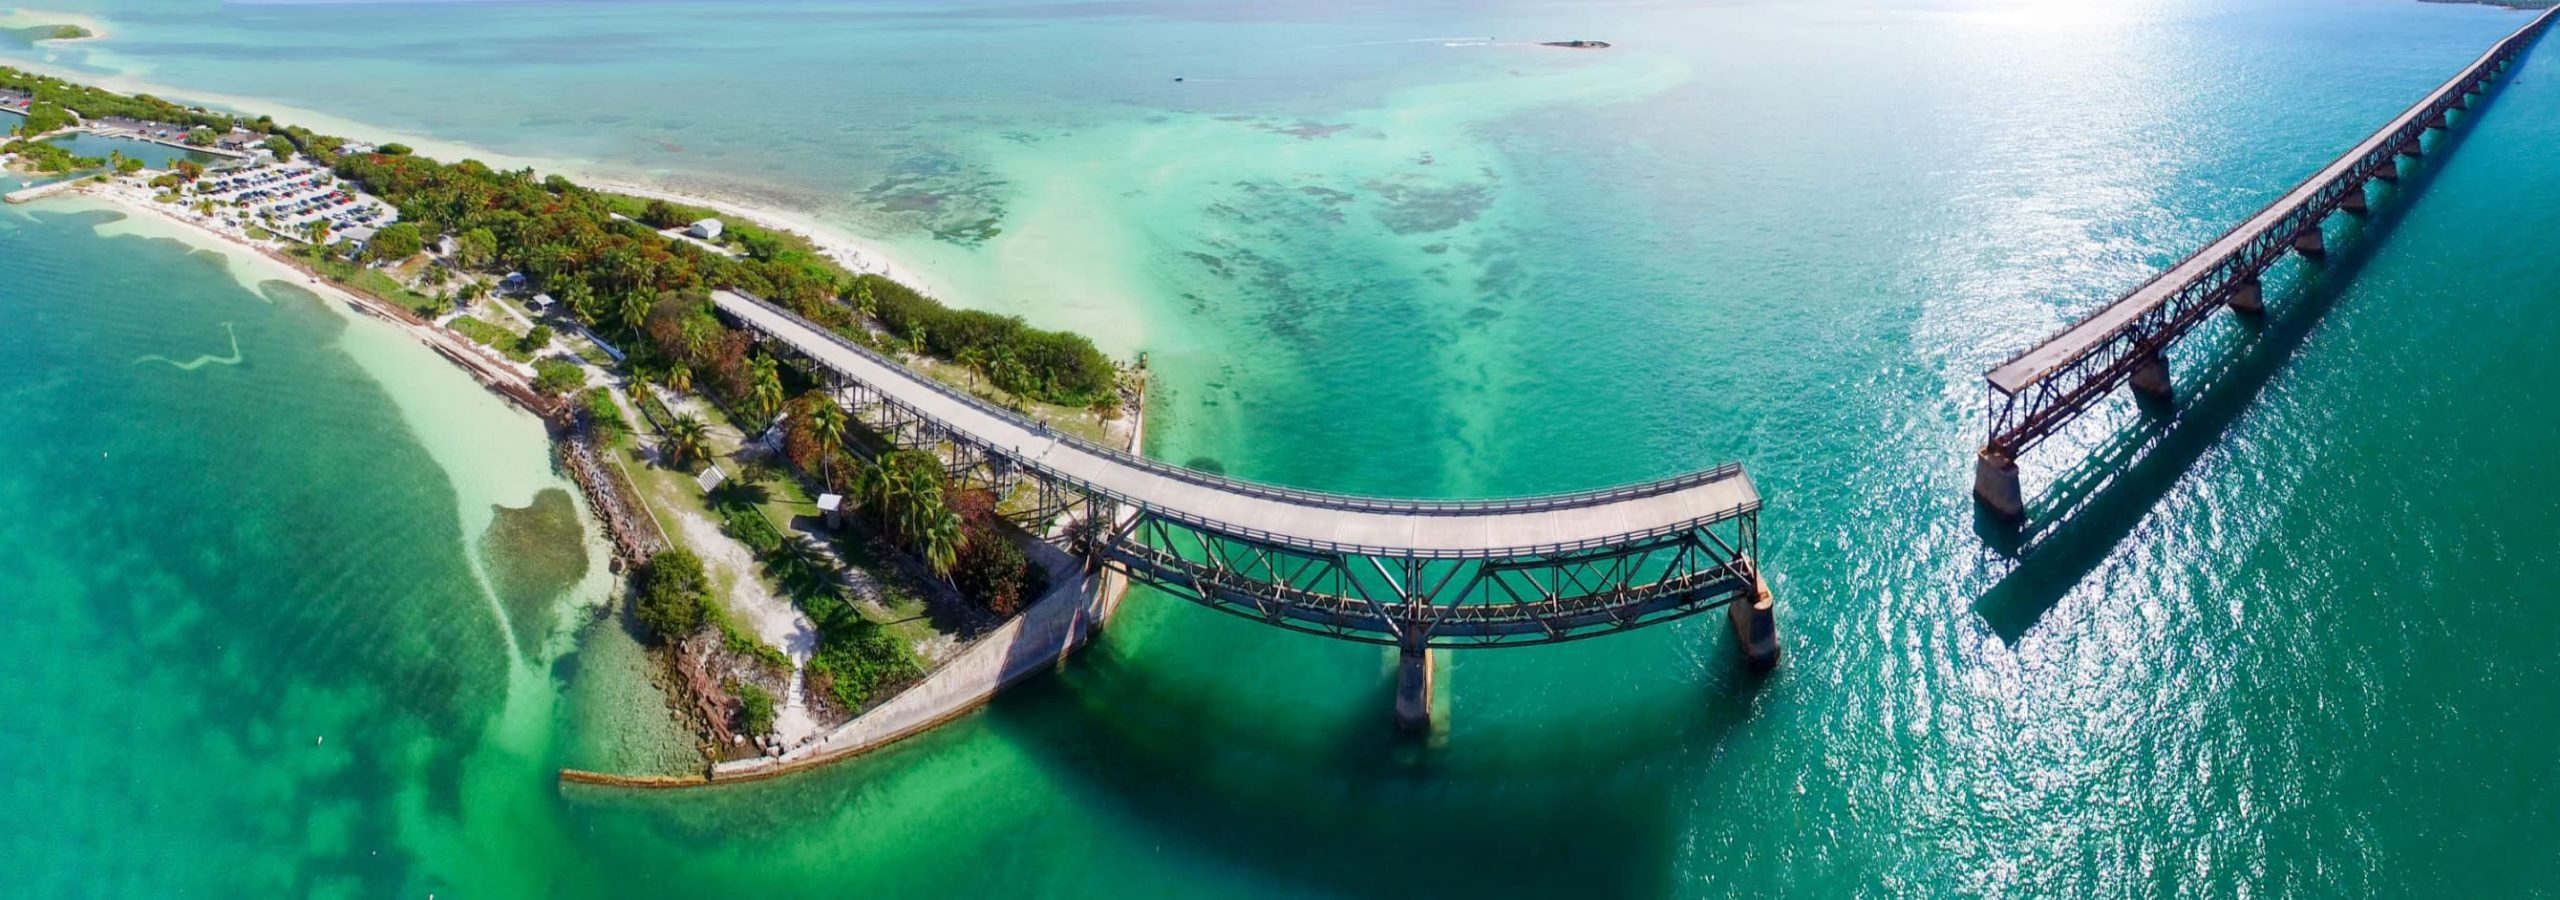 The Best Time To Visit Key West, Florida